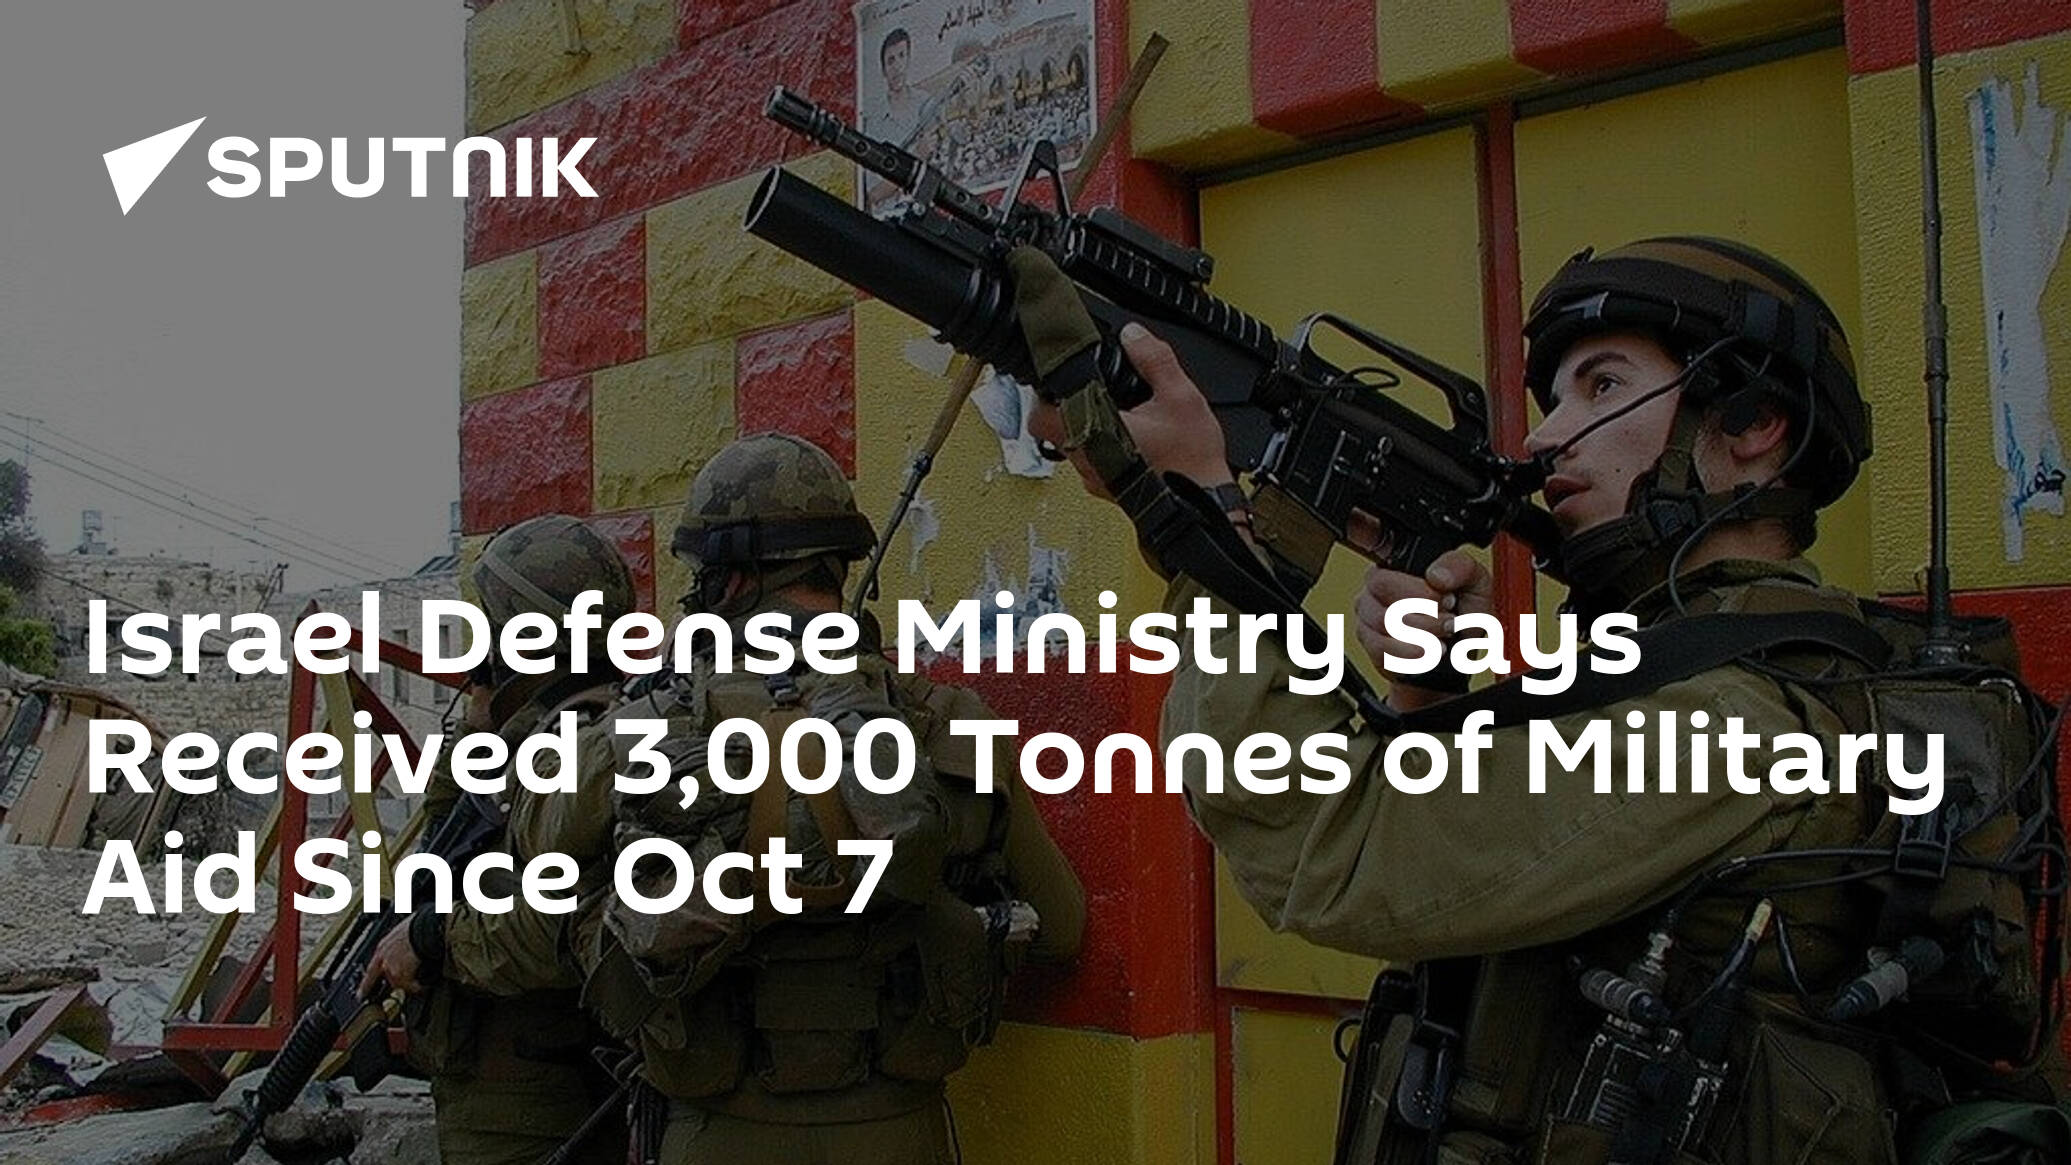 Israel Defense Ministry Says Received 3,000 Tonnes of Military Aid Since Oct 7